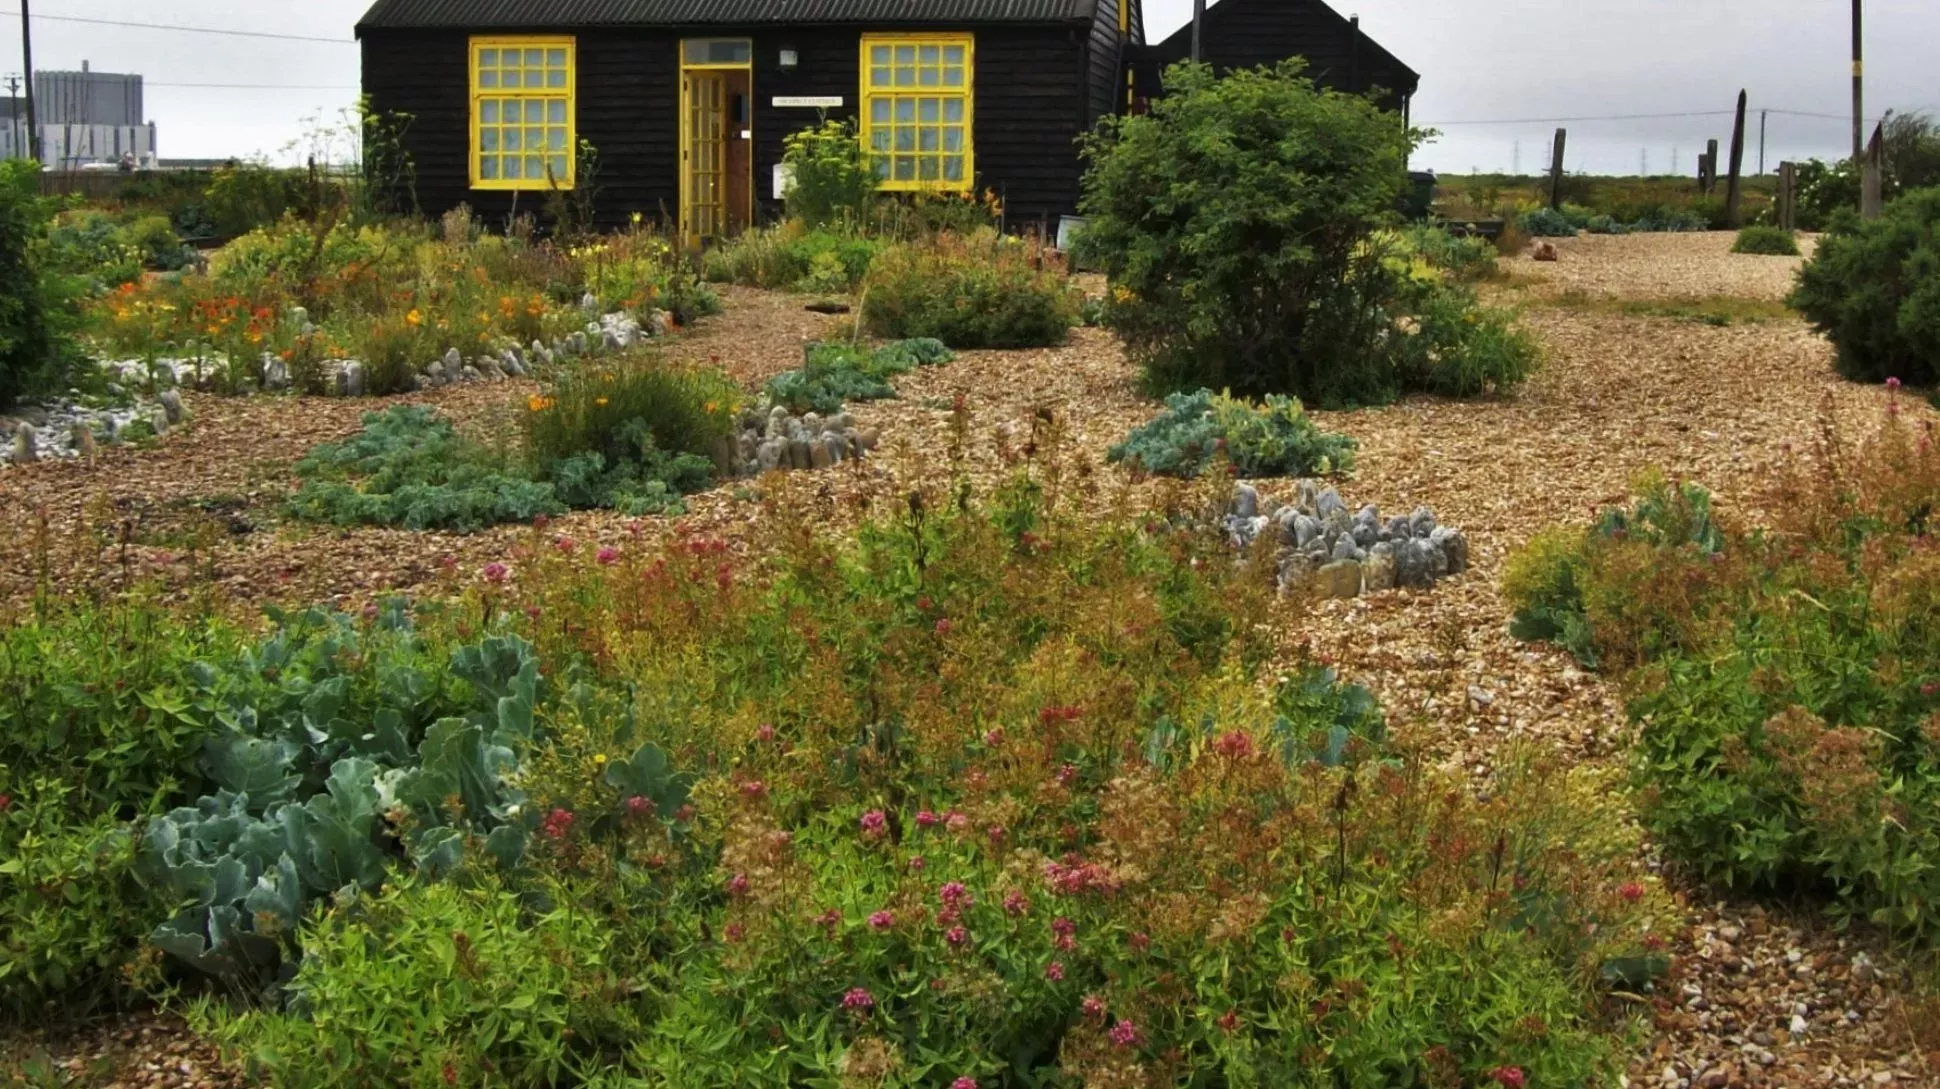 A close up on many colourful seaside plants in front of a pitch black cottage